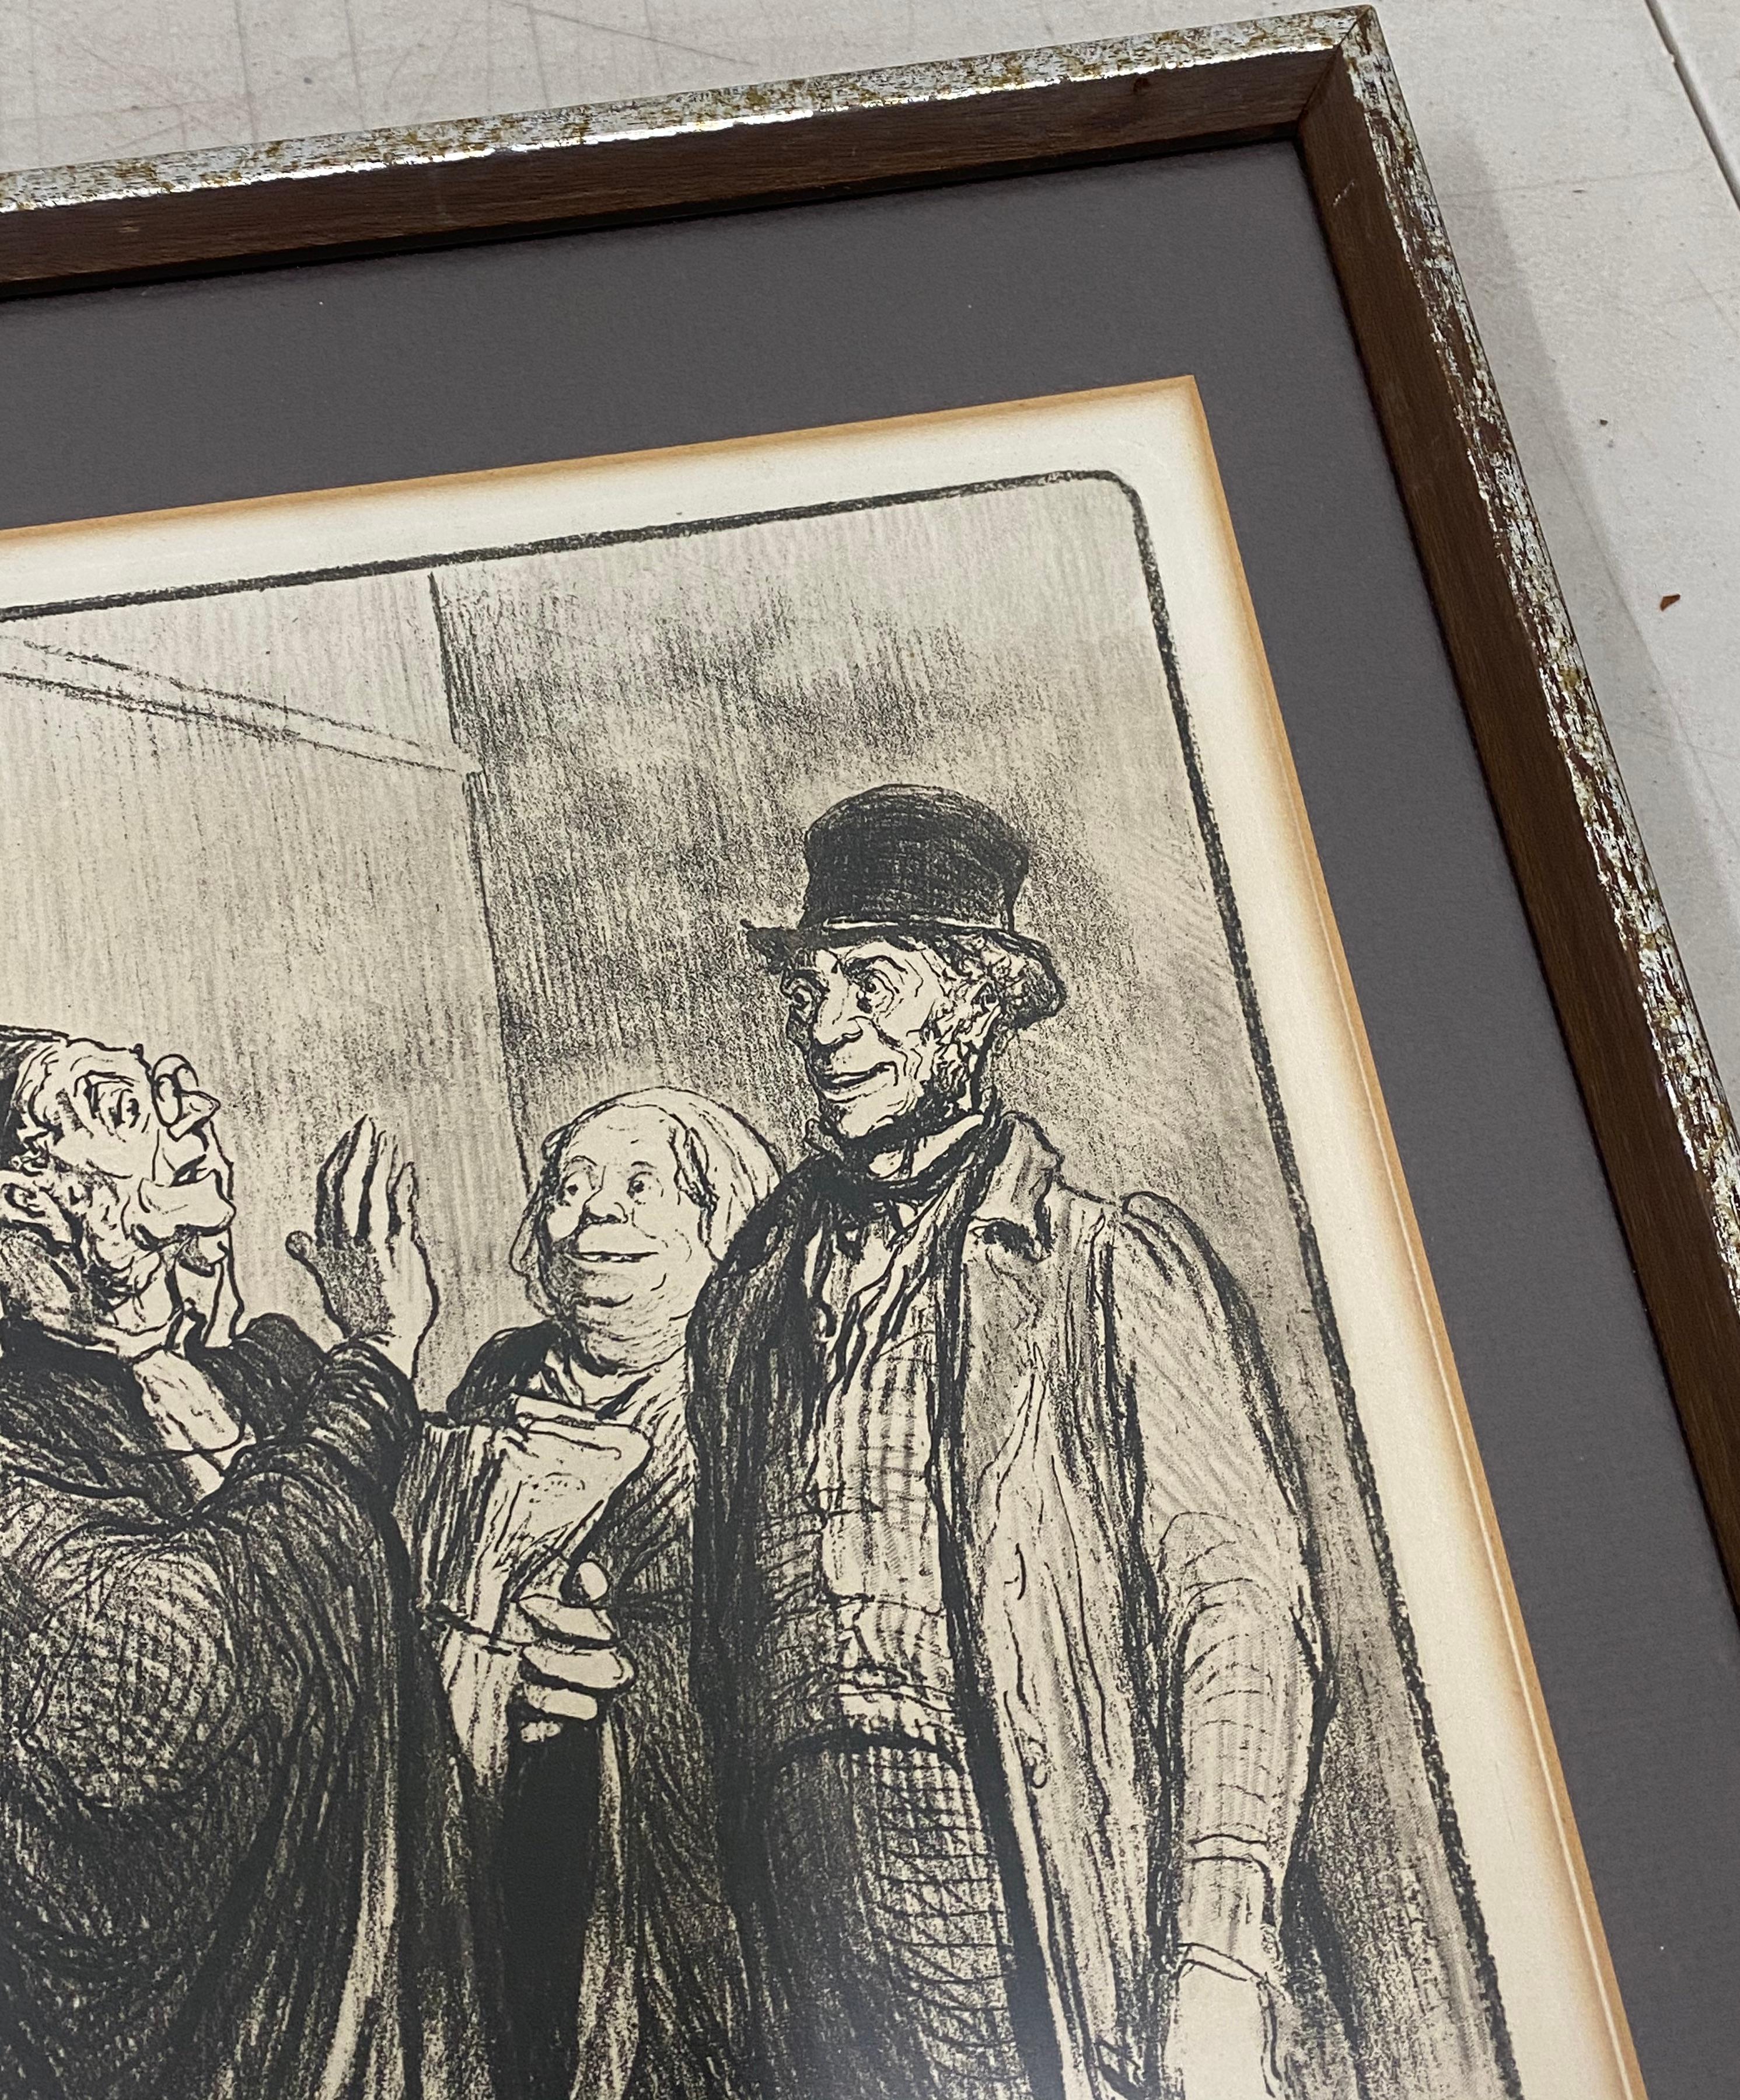 Vintage Framed Lithograph by Honore Daumier - Impressionist Print by Honoré Daumier